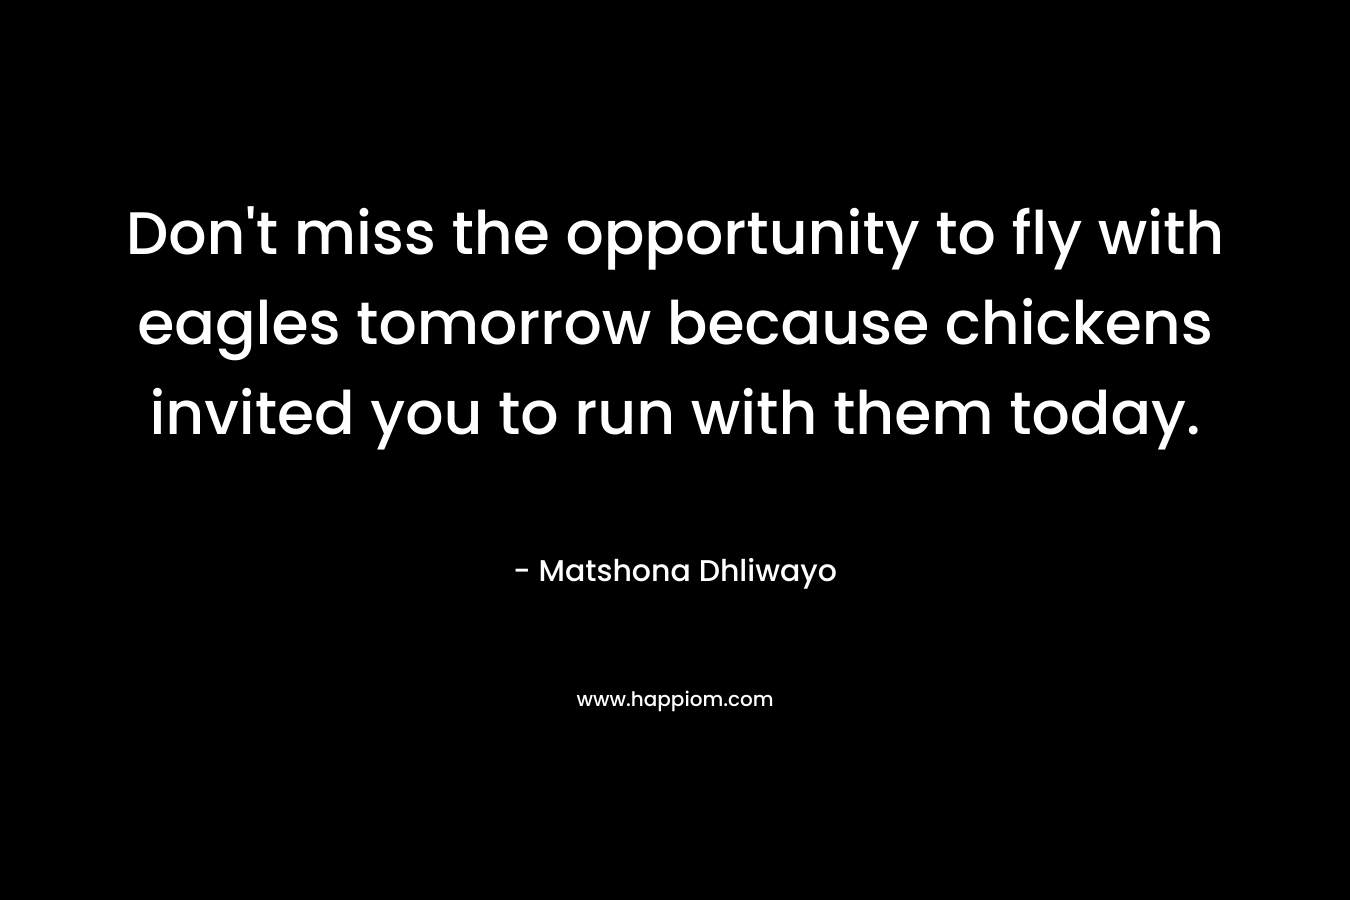 Don’t miss the opportunity to fly with eagles tomorrow because chickens invited you to run with them today. – Matshona Dhliwayo